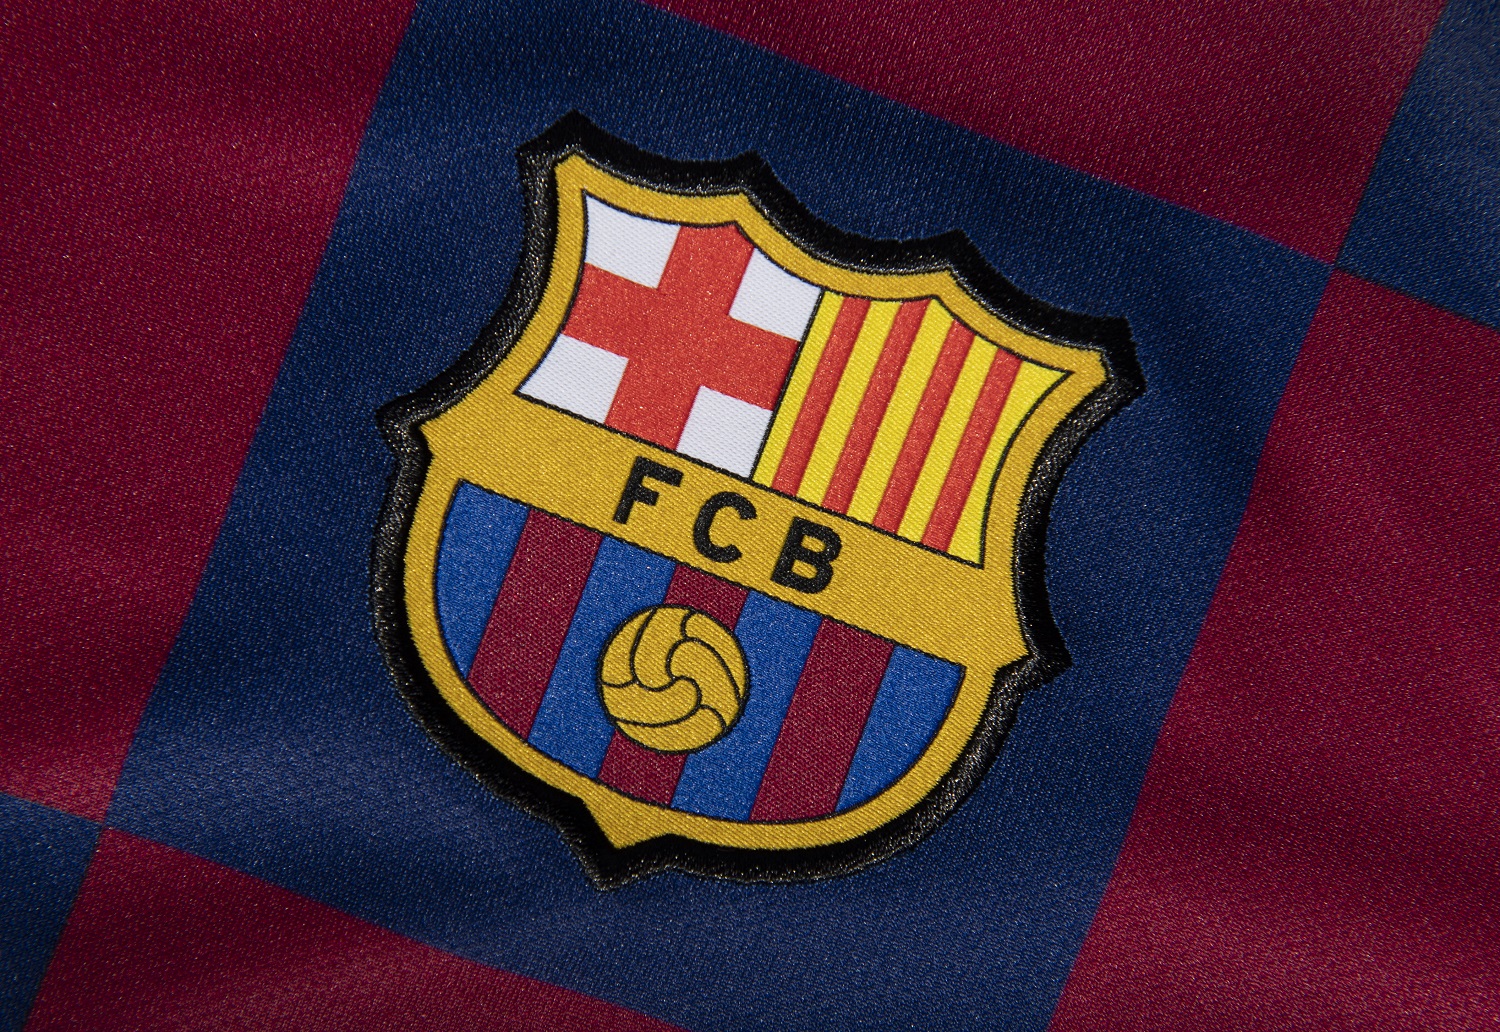 Barcelona, One of the Most Famous Teams in Sports, Is Close To Bankruptcy